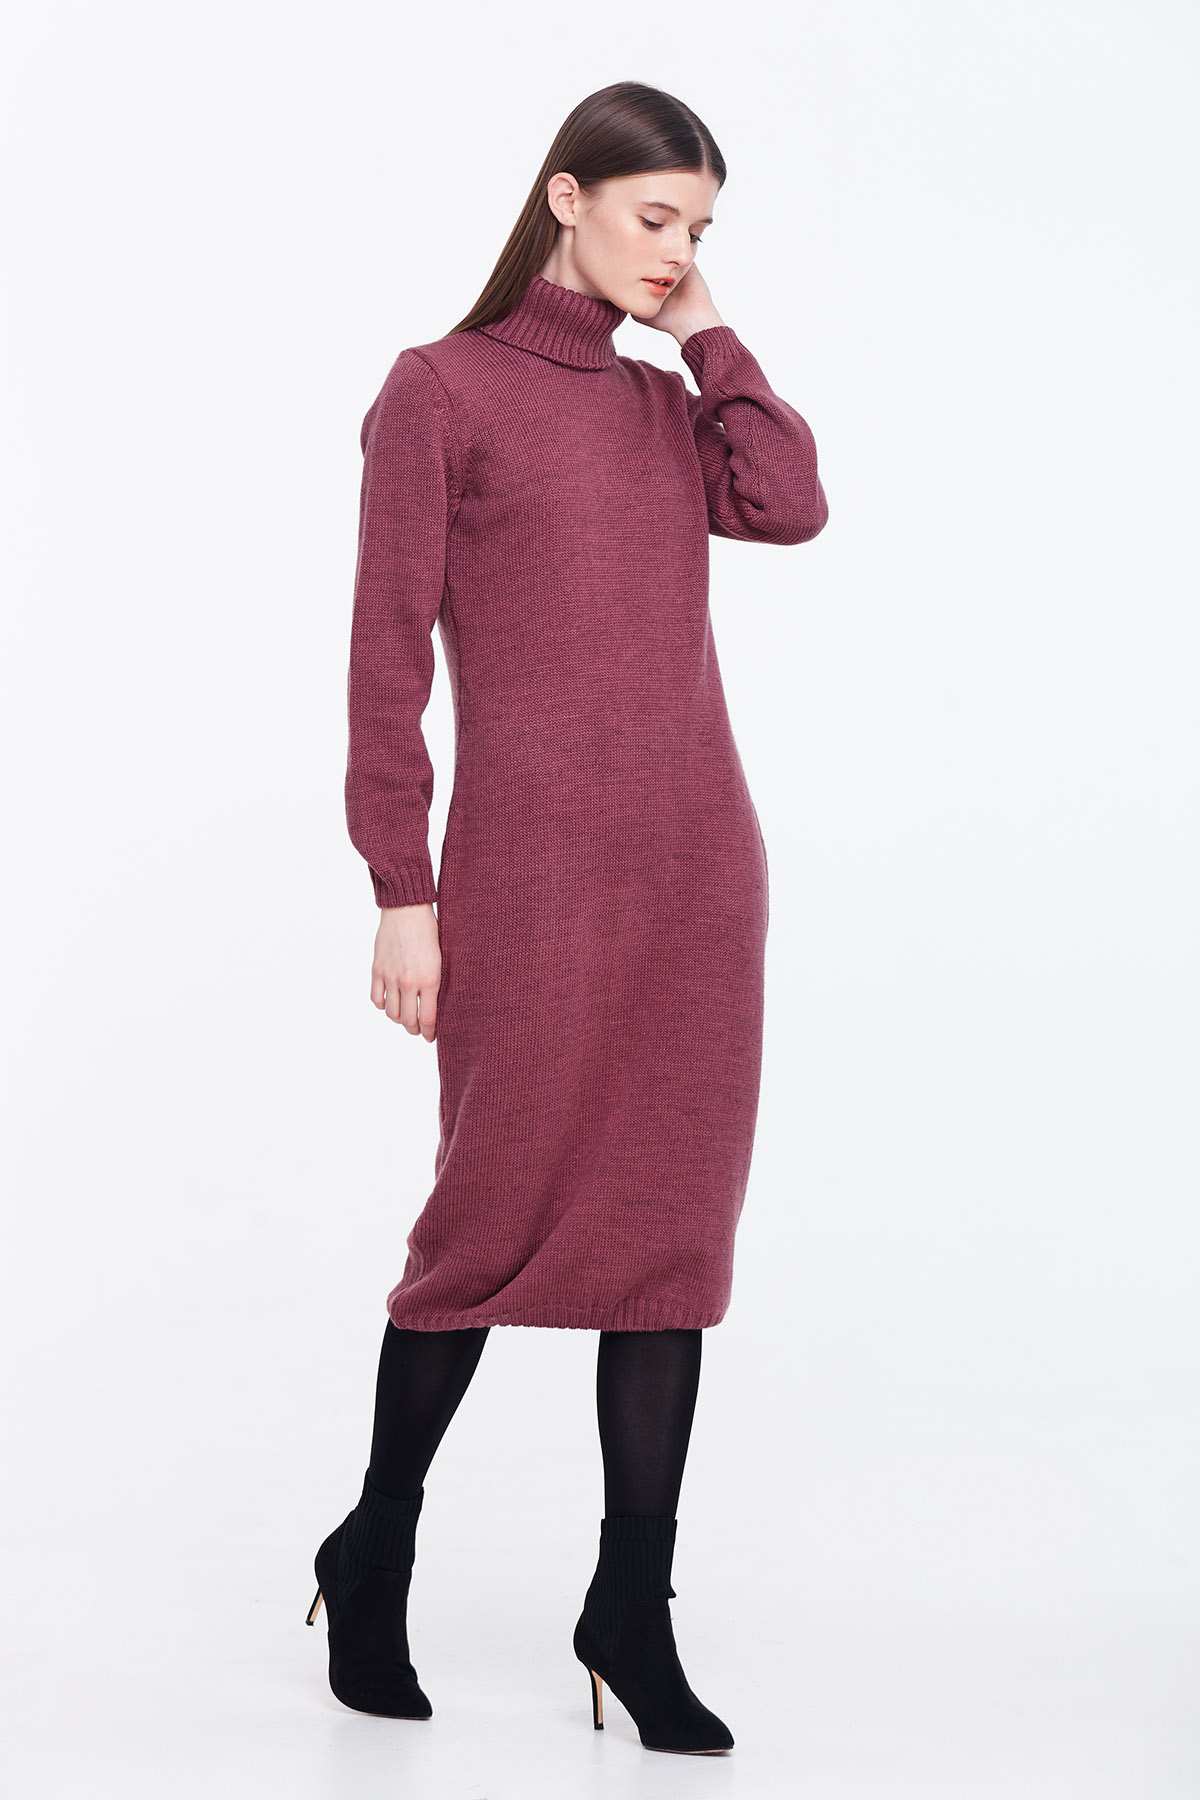 Wine knit dress with a stand up collar, photo 3